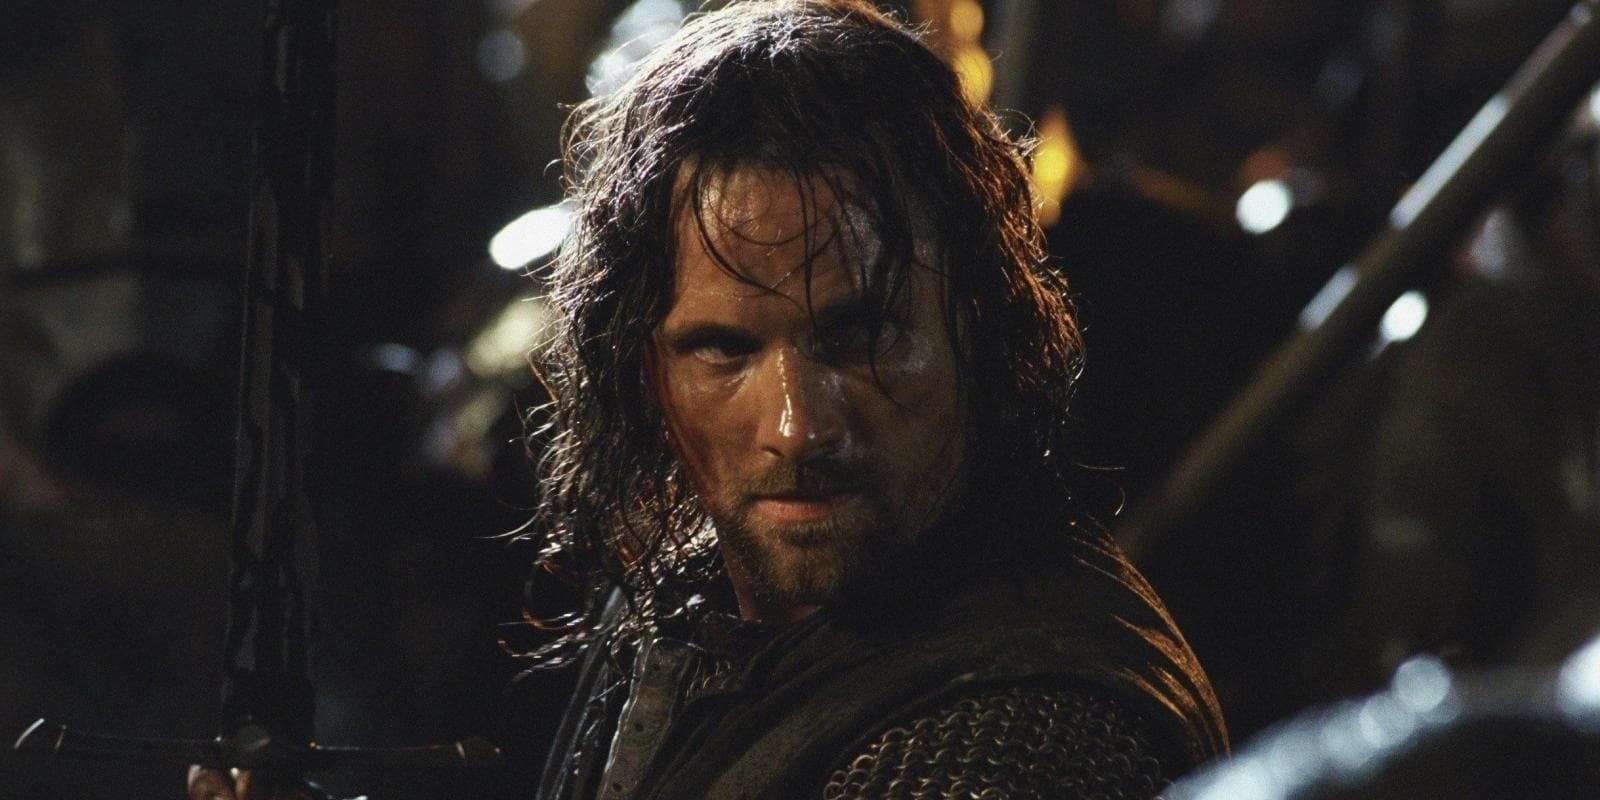 Aragorn holding his sword in The Lord of the Rings